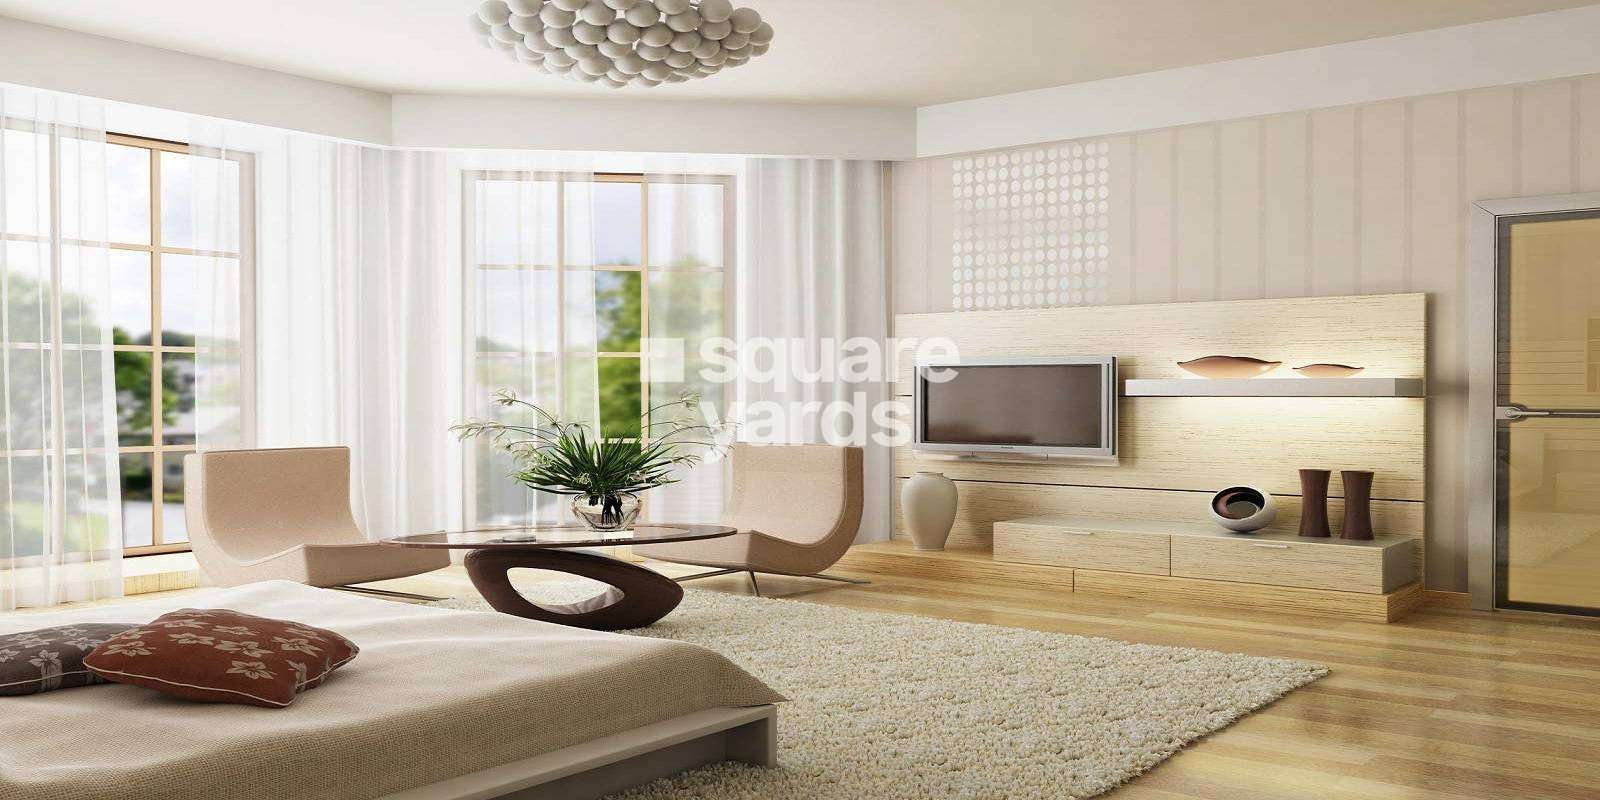 dhoot time residency project apartment interiors1